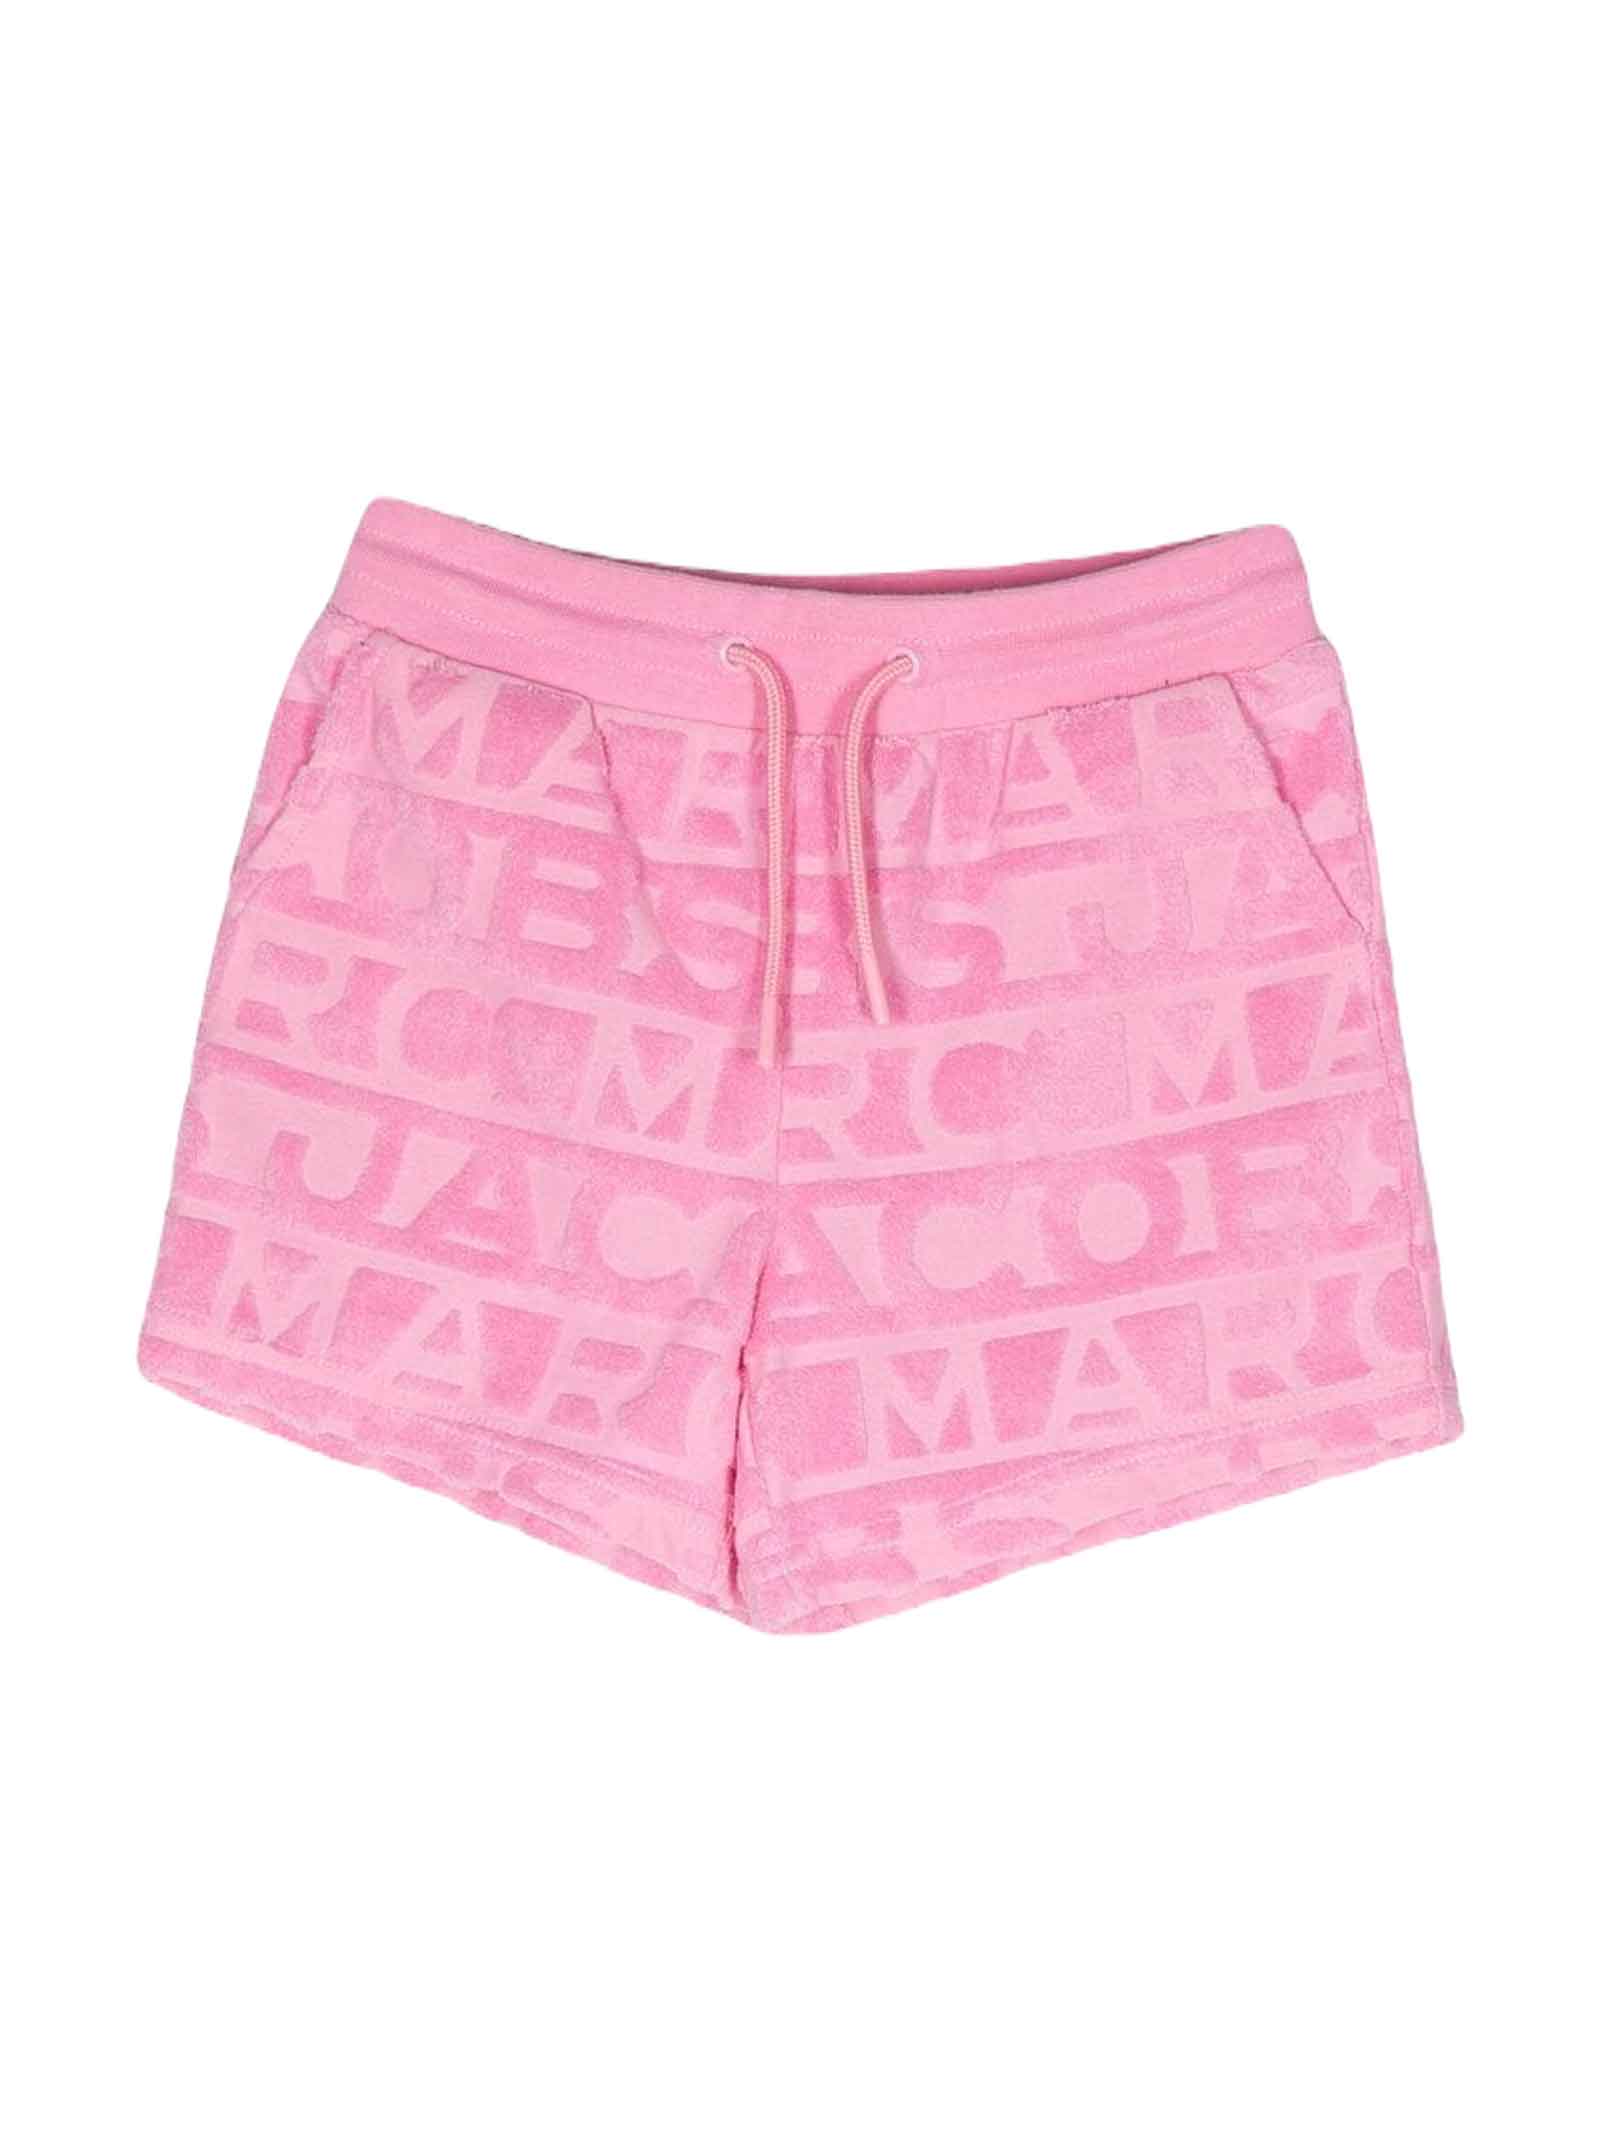 MARC JACOBS PINK SHORTS GIRL